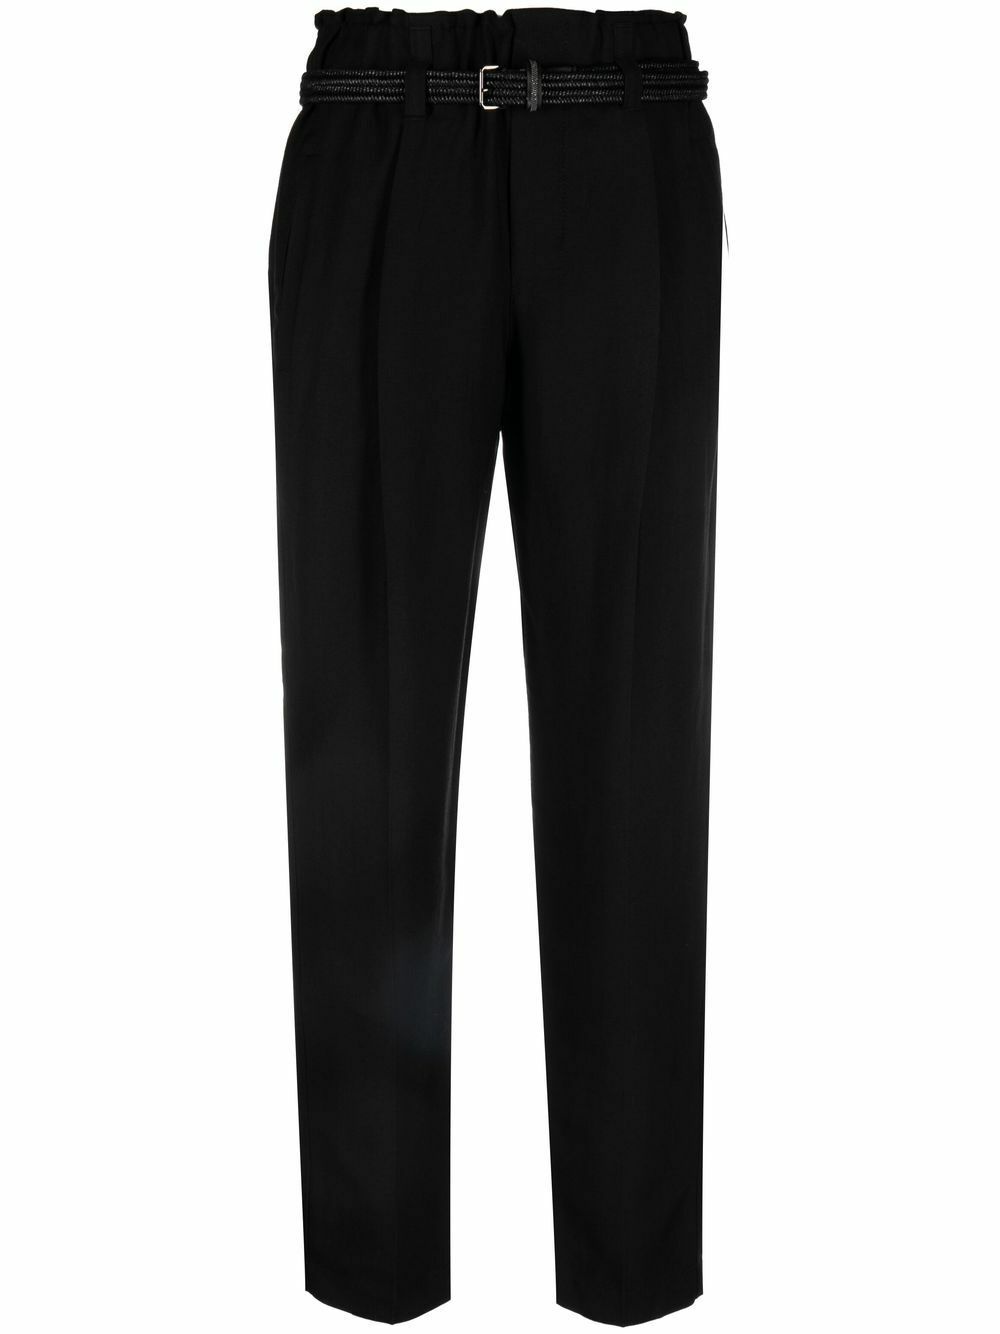 BRUNELLO CUCINELLI - High-waisted Cropped Trousers Brunello Cucinelli